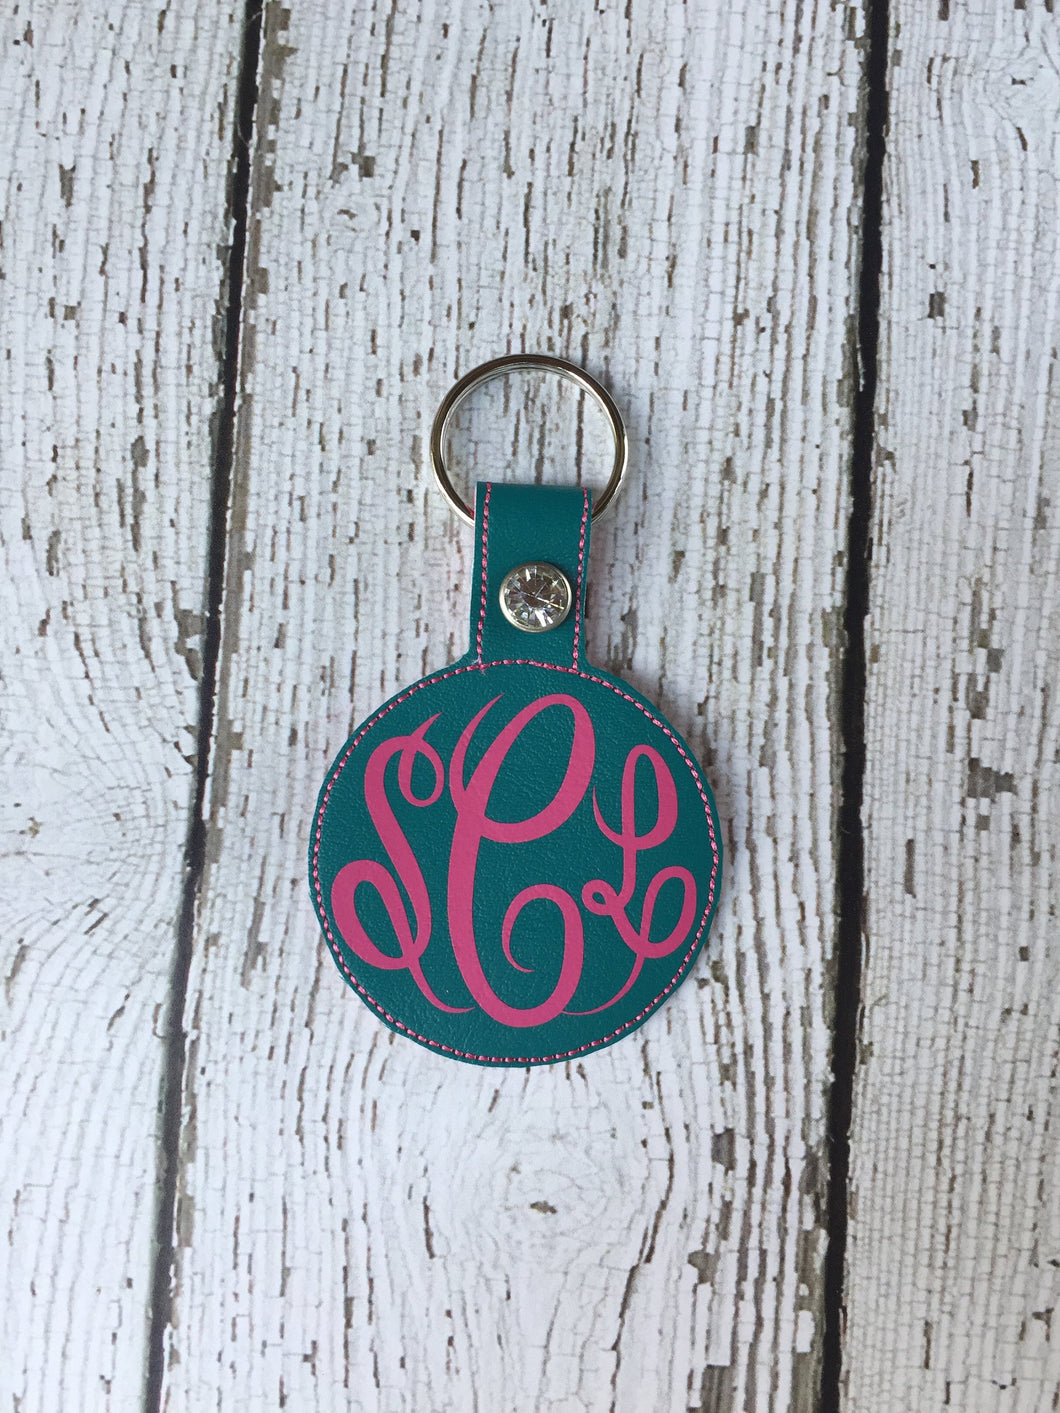 Monogram Gift For Her, Gift For Her Monogram, For Her Monogram Gift, Birthday Gift For Her, Christmas Gift Ideas For Her